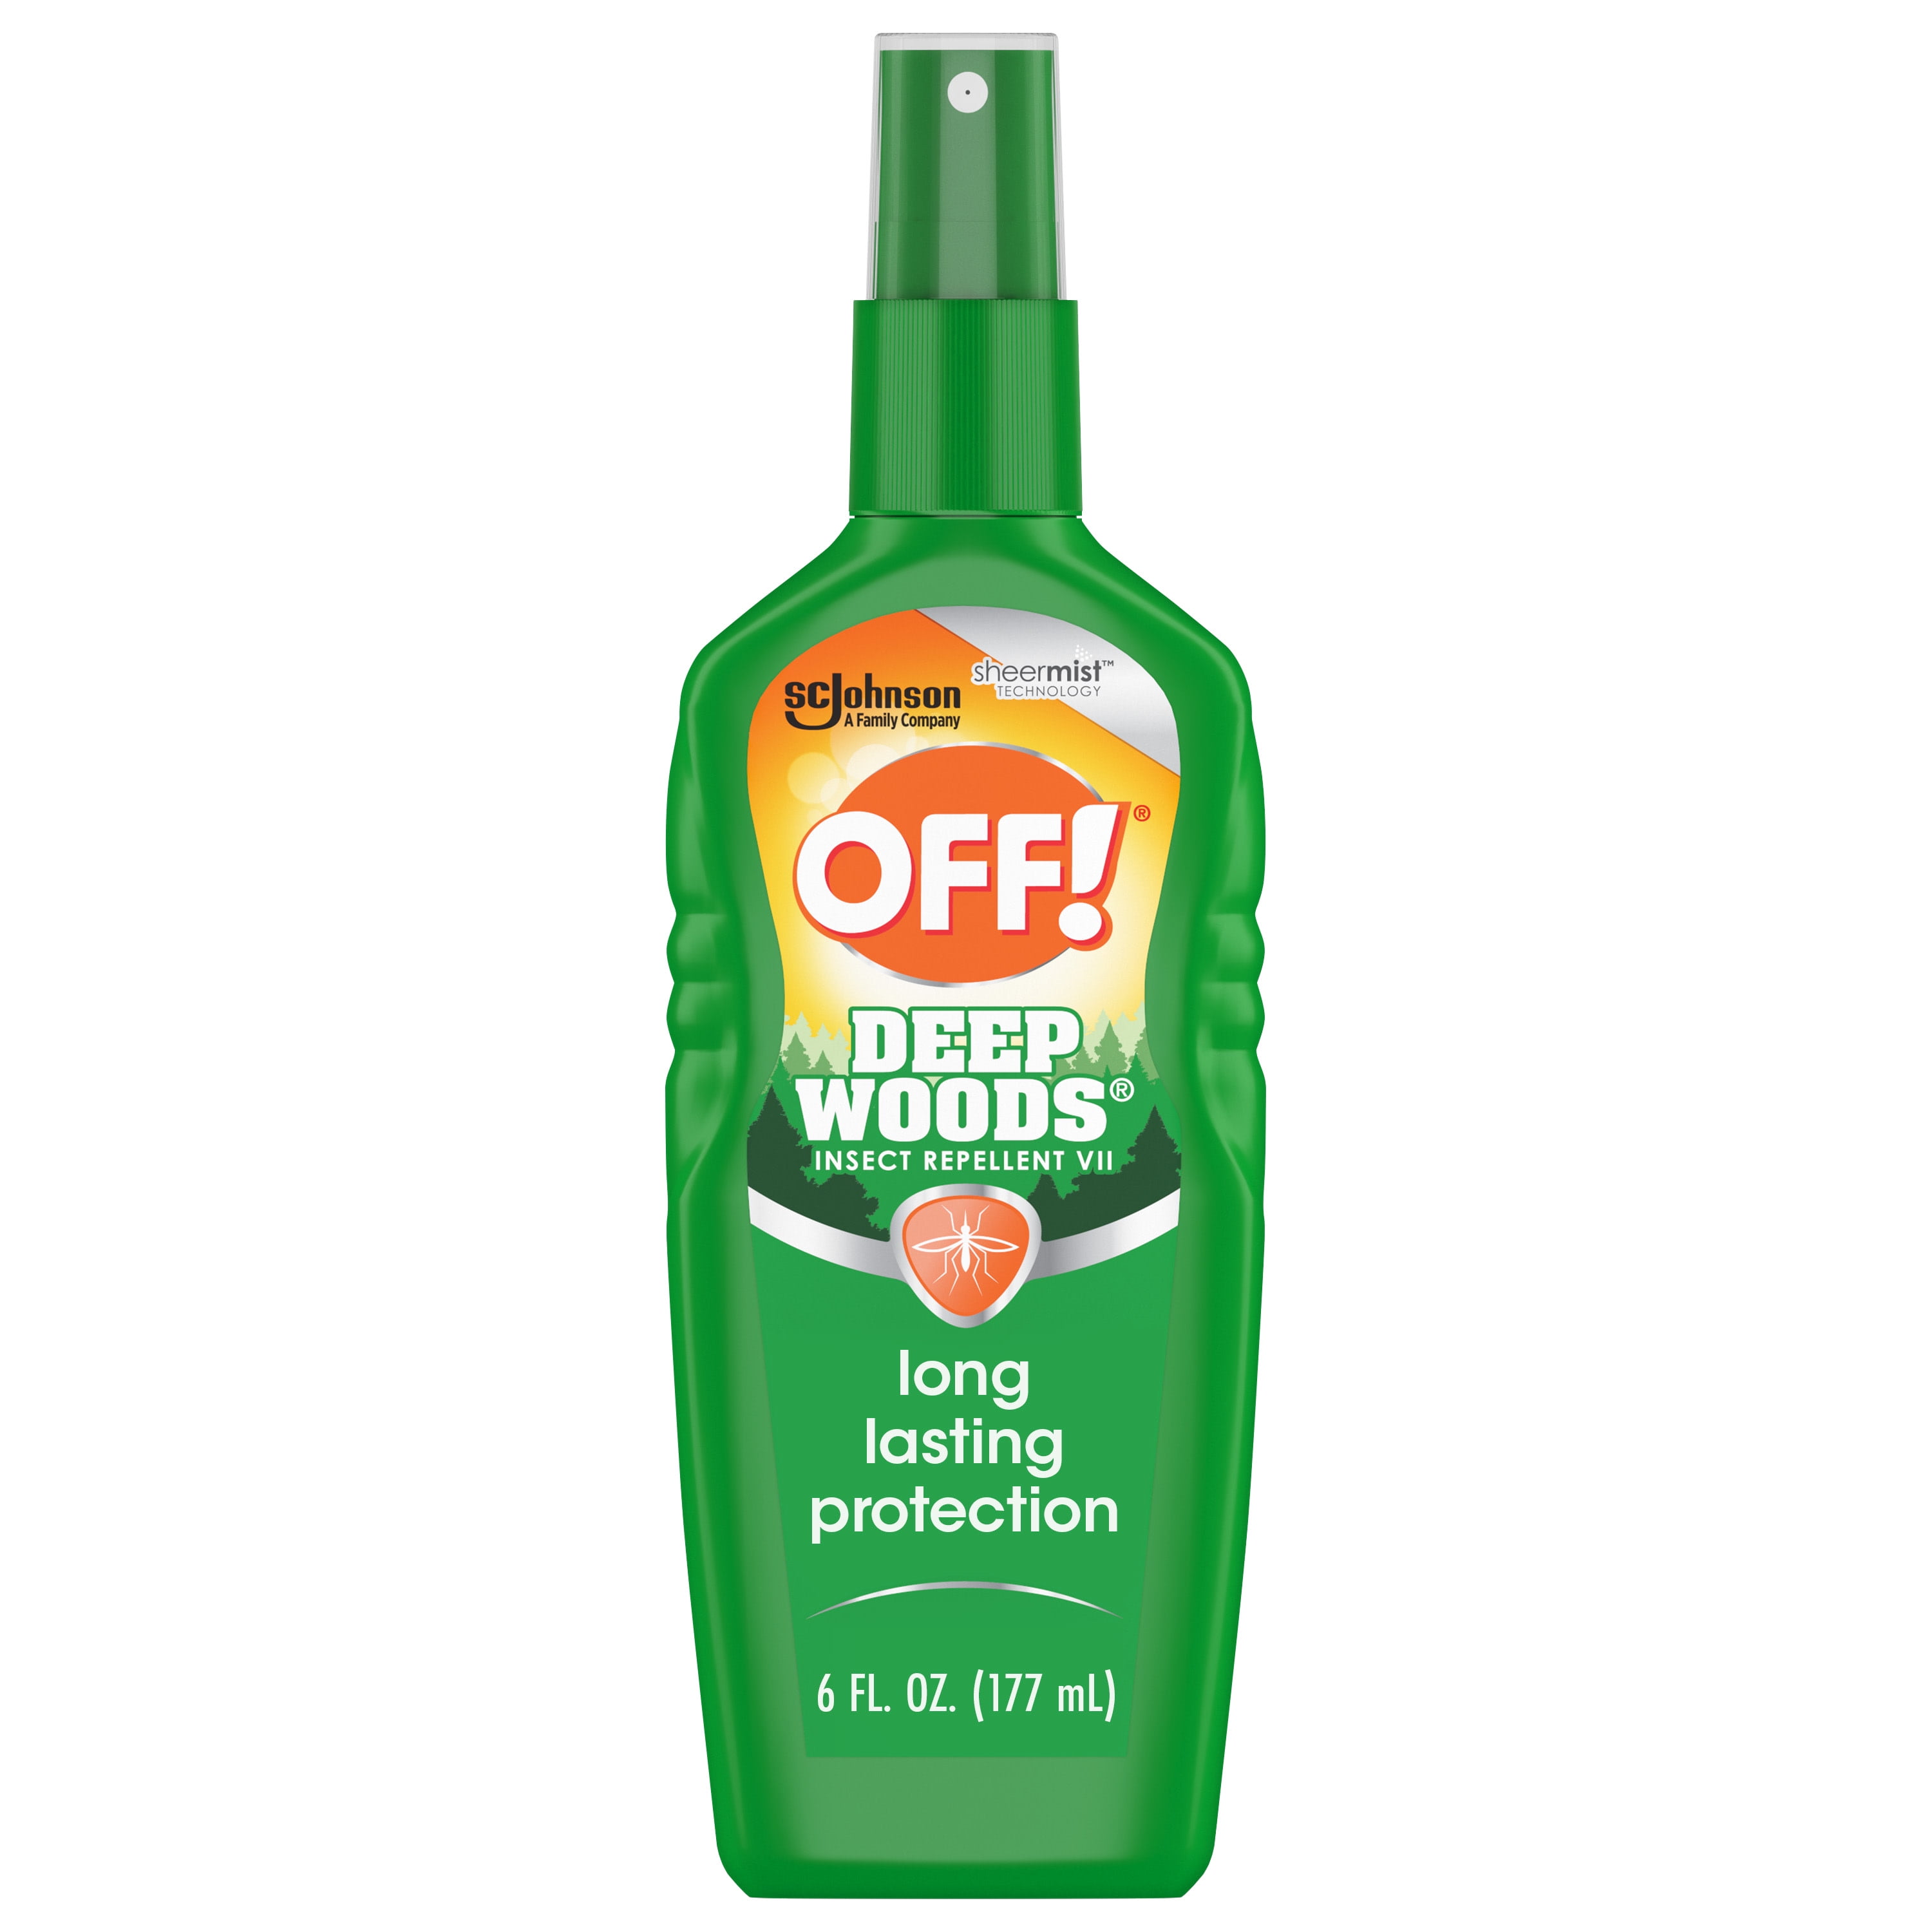 OFF! Deep Woods Insect Repellent VII, 6 Oz